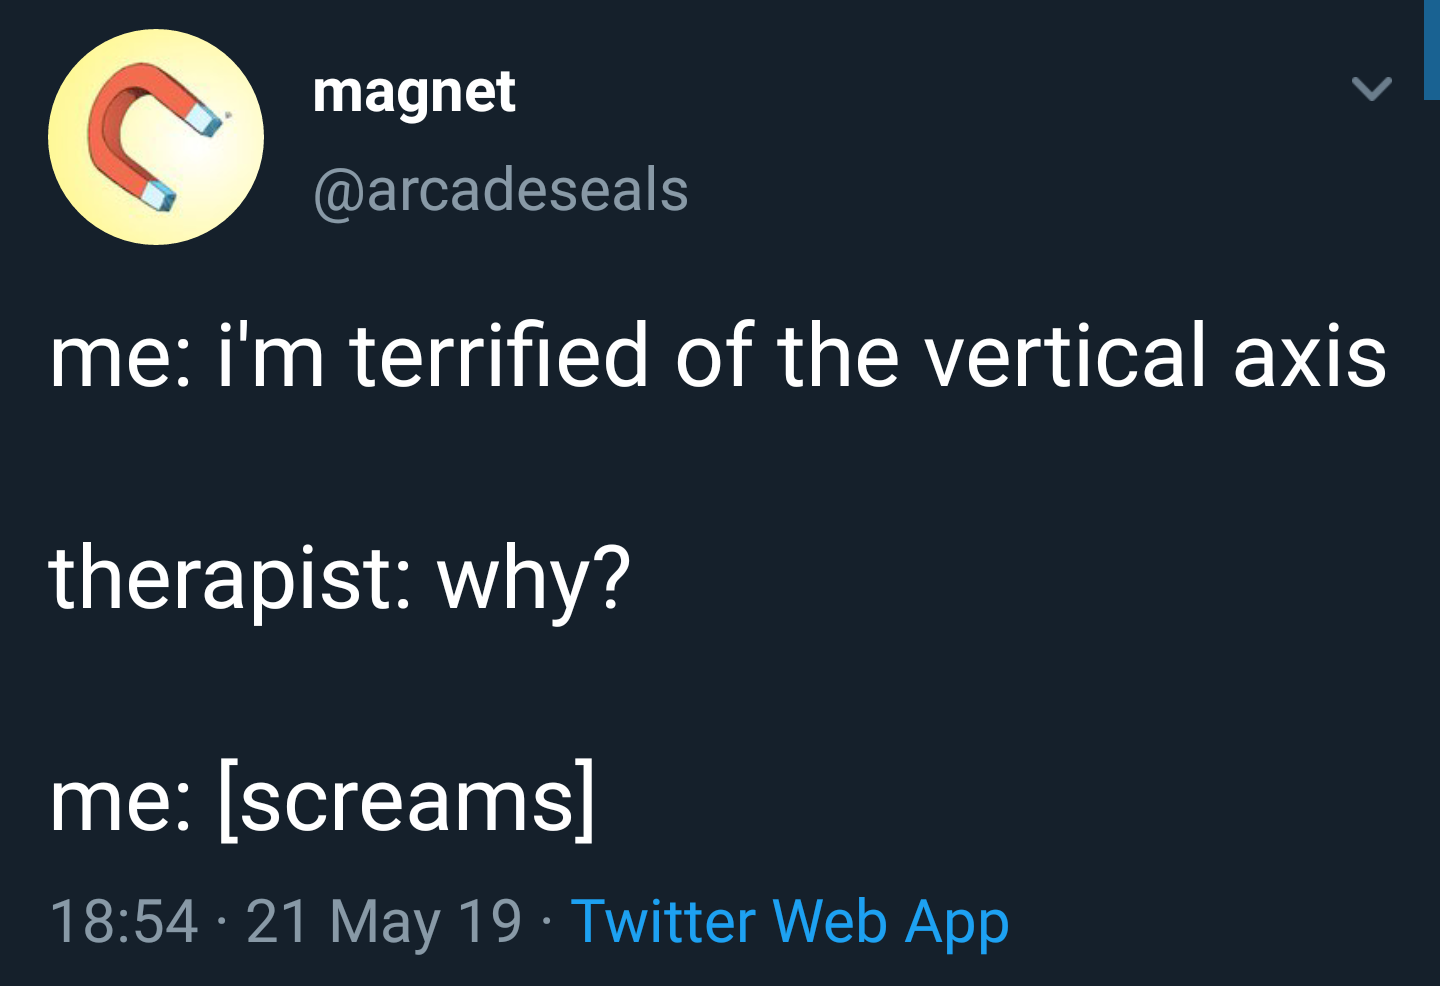 &quot;terrifed of the vertical axis&quot; &quot;why&quot; and then the person screams